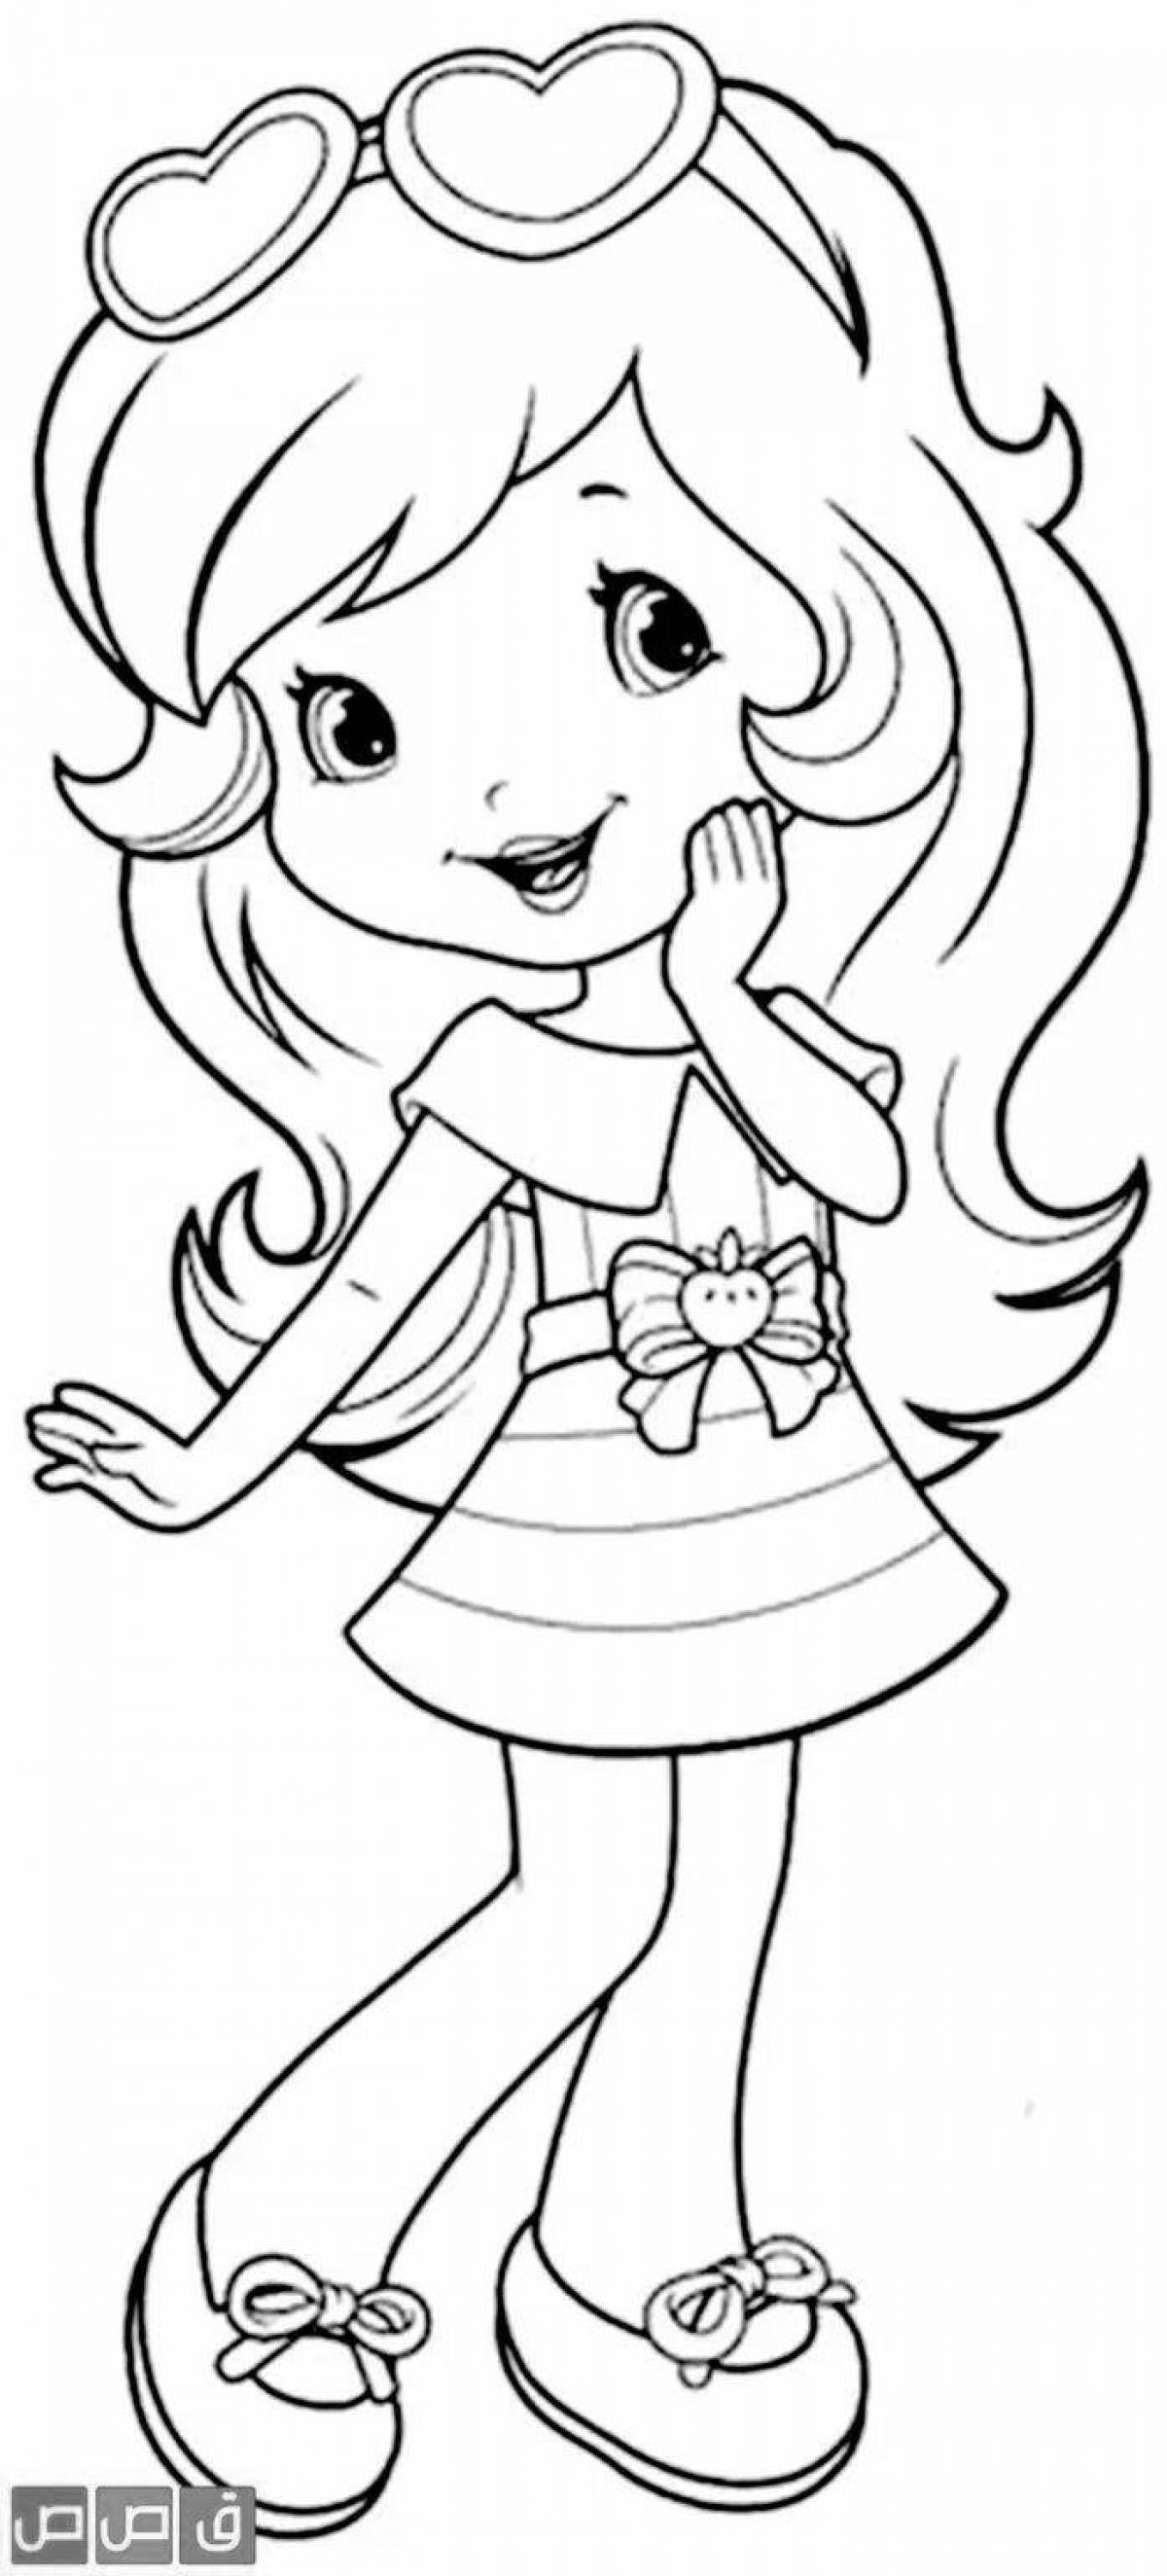 Animated crimson girl coloring page